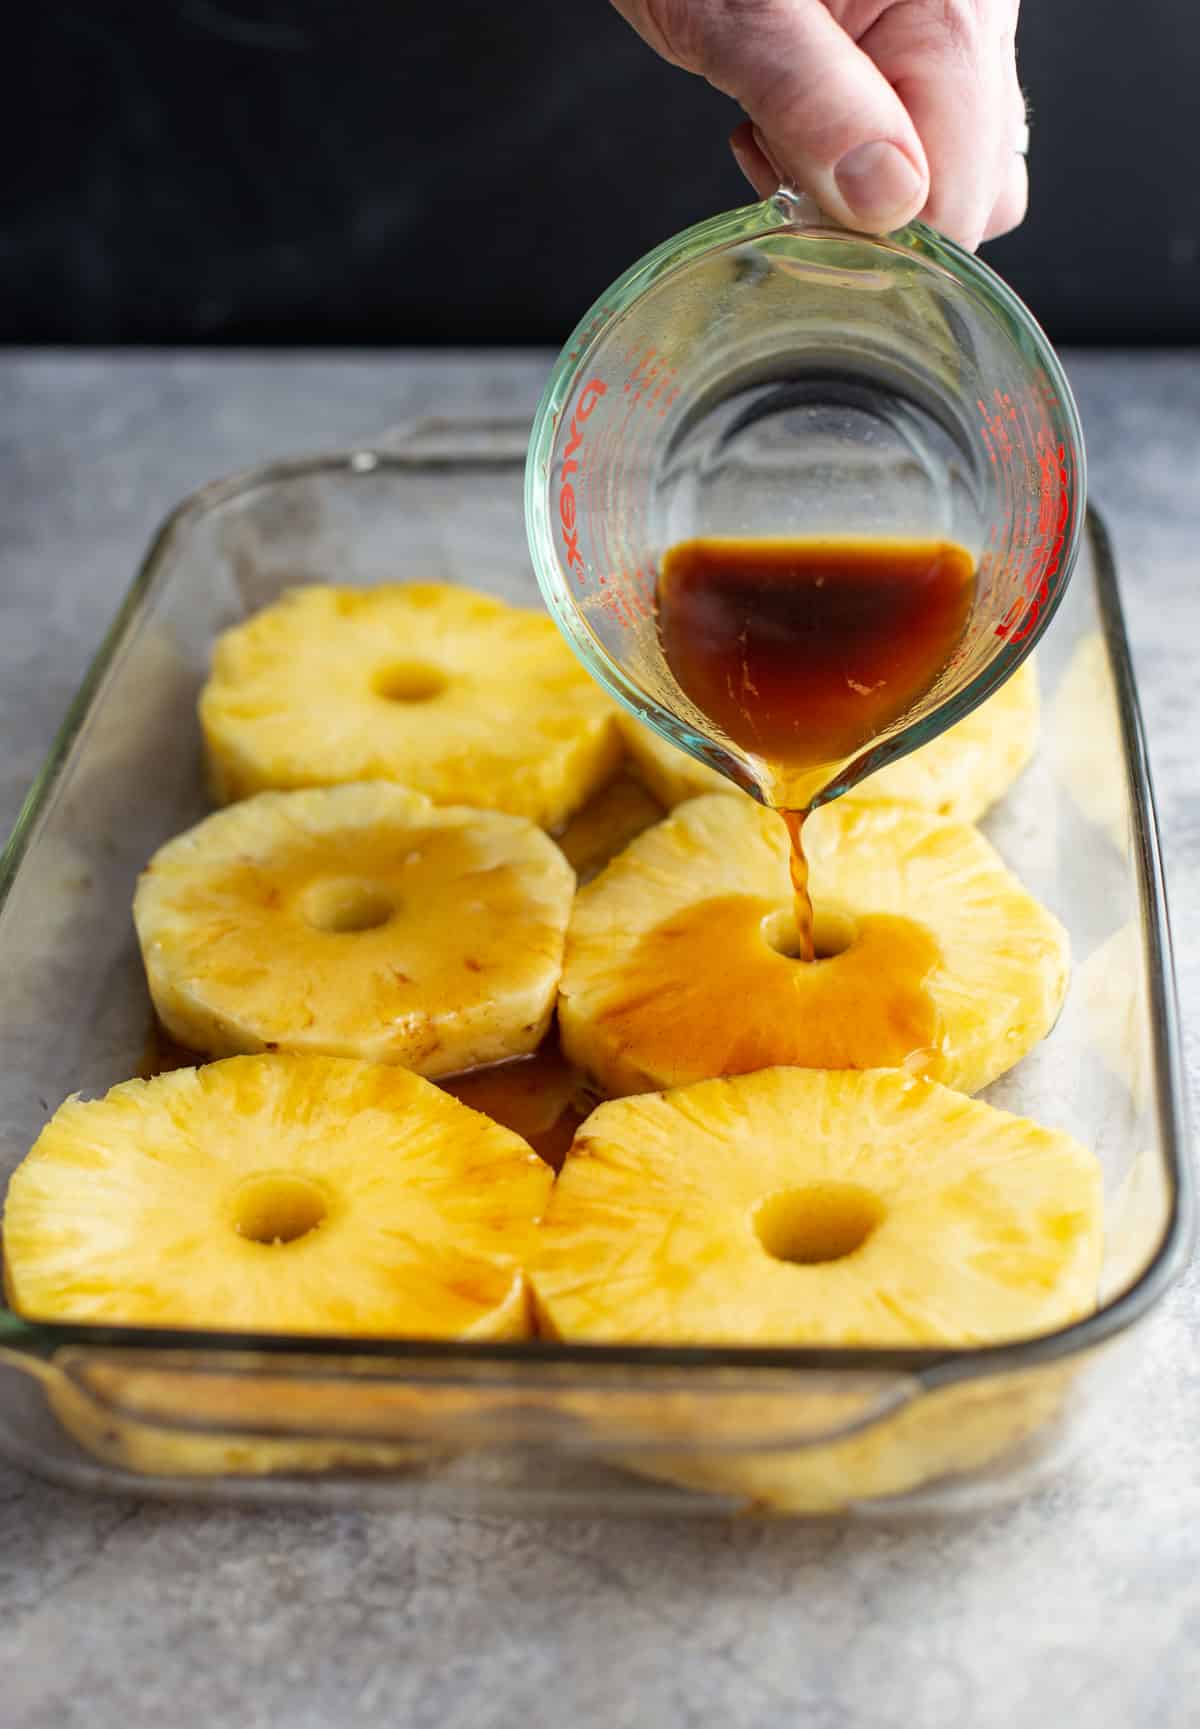 Pouring the rum soak marinade into a pan of pineapple slices.